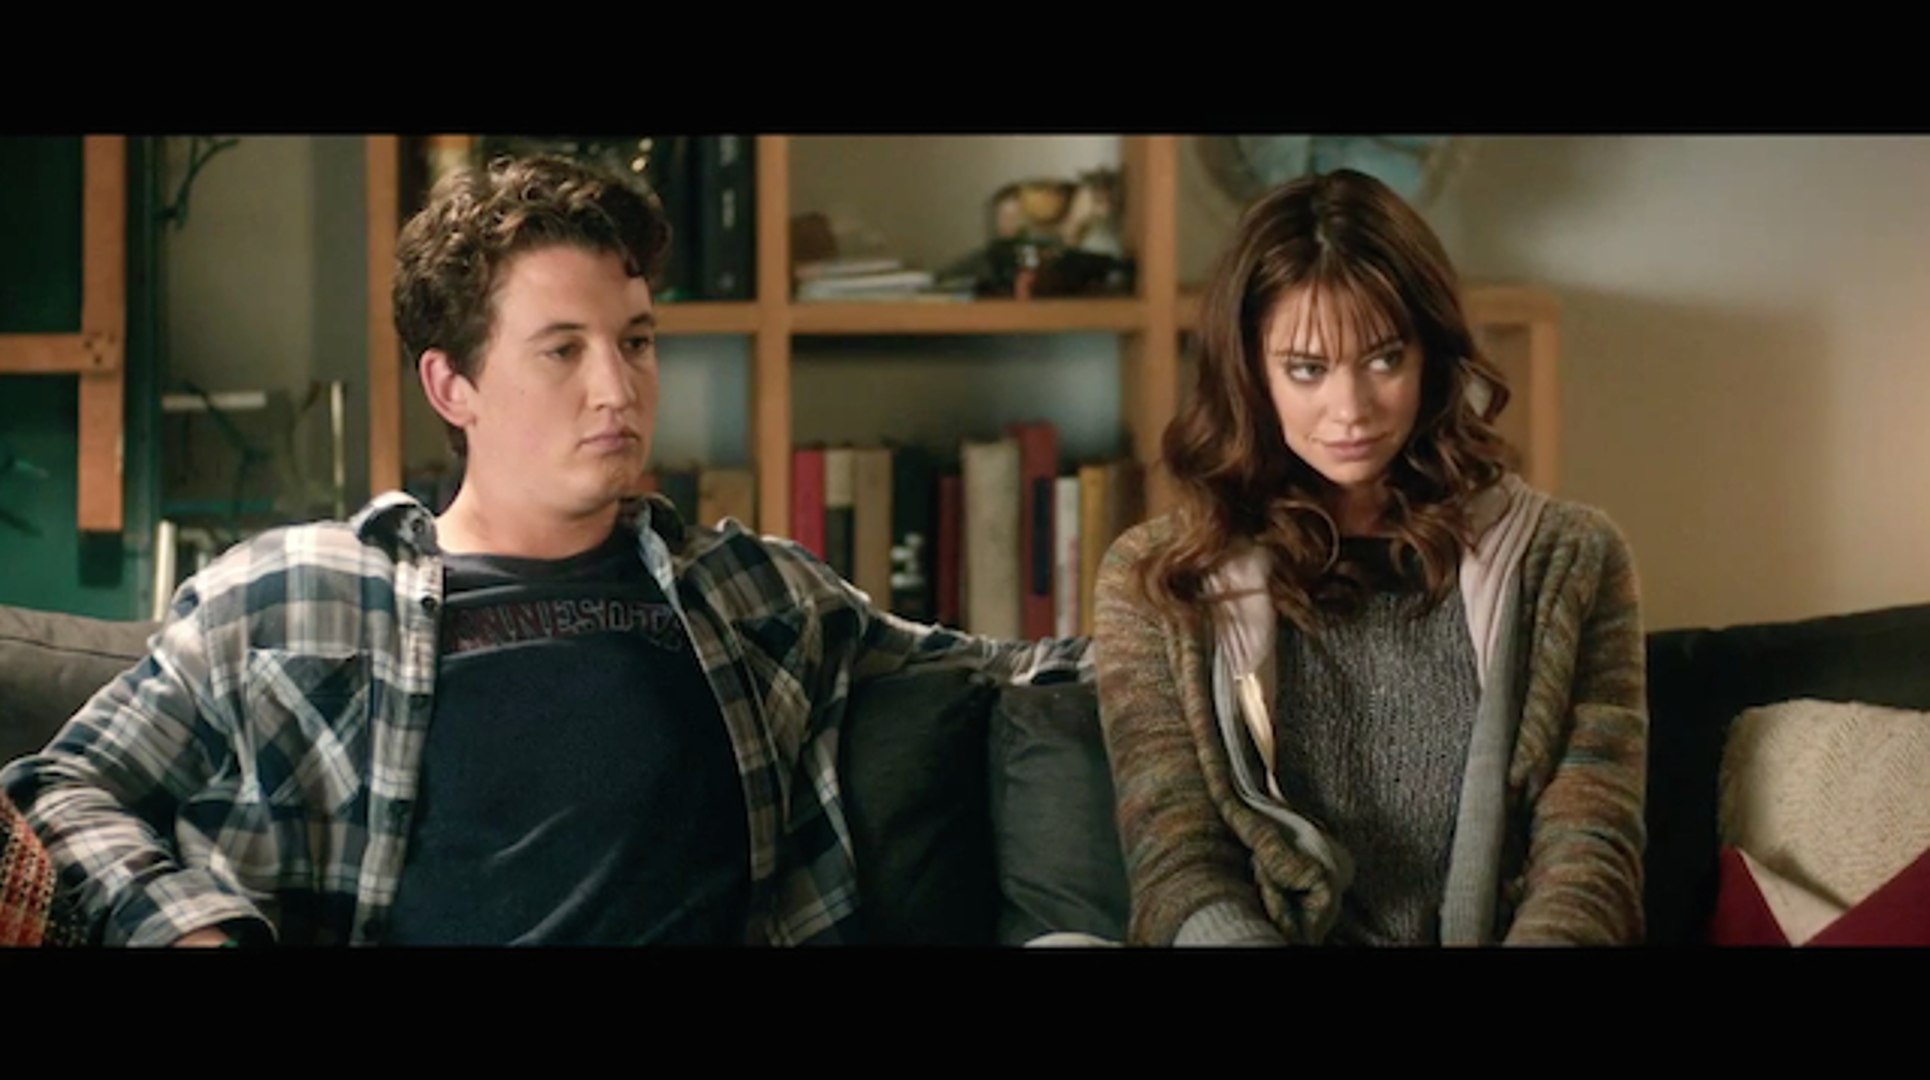 Two Night Stand' Trailer: A One Night Stand Gone Wrong